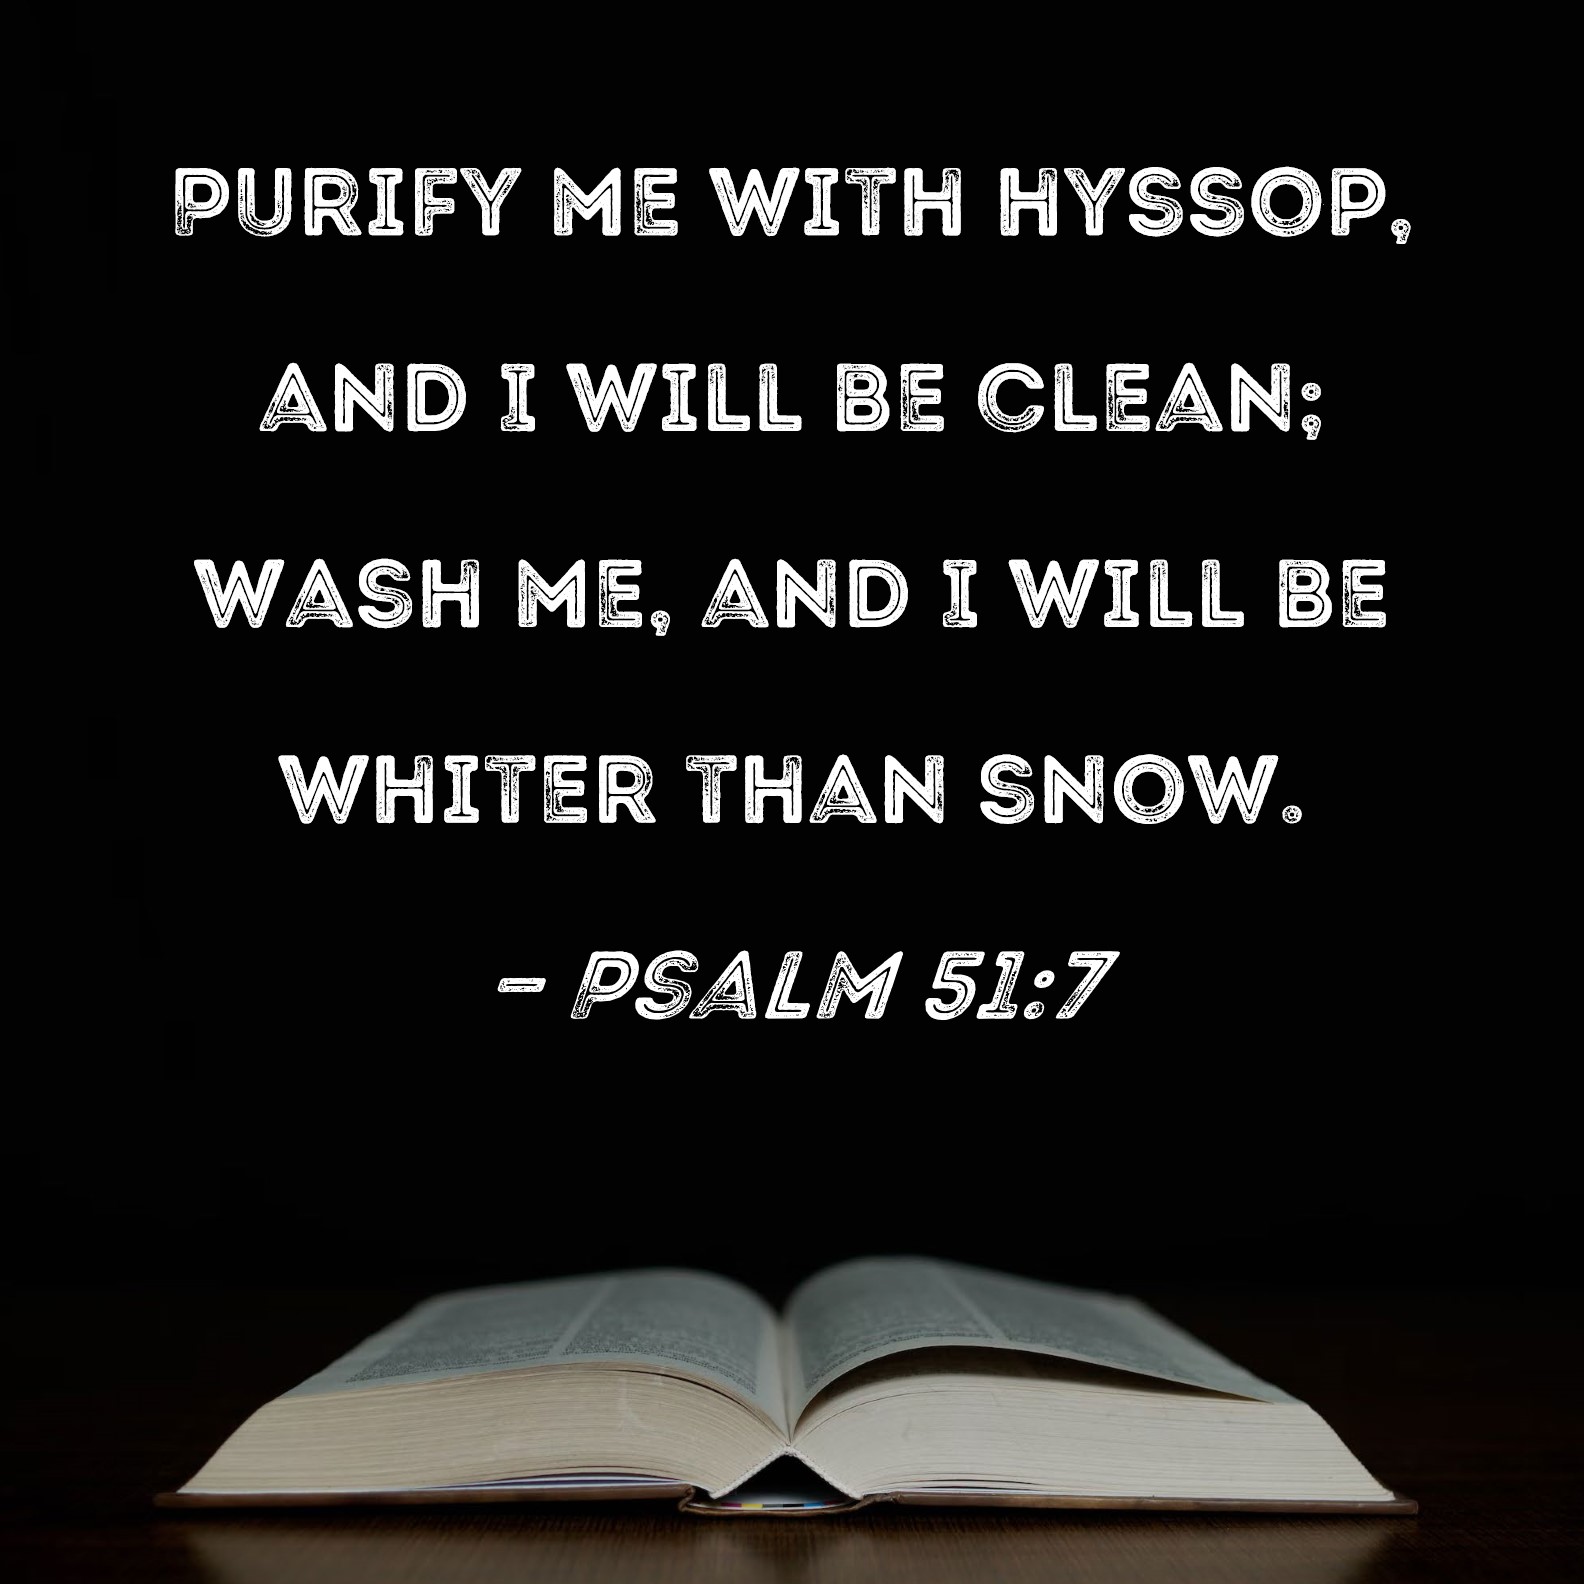 psalm 51 7 bible hyssop cleansing